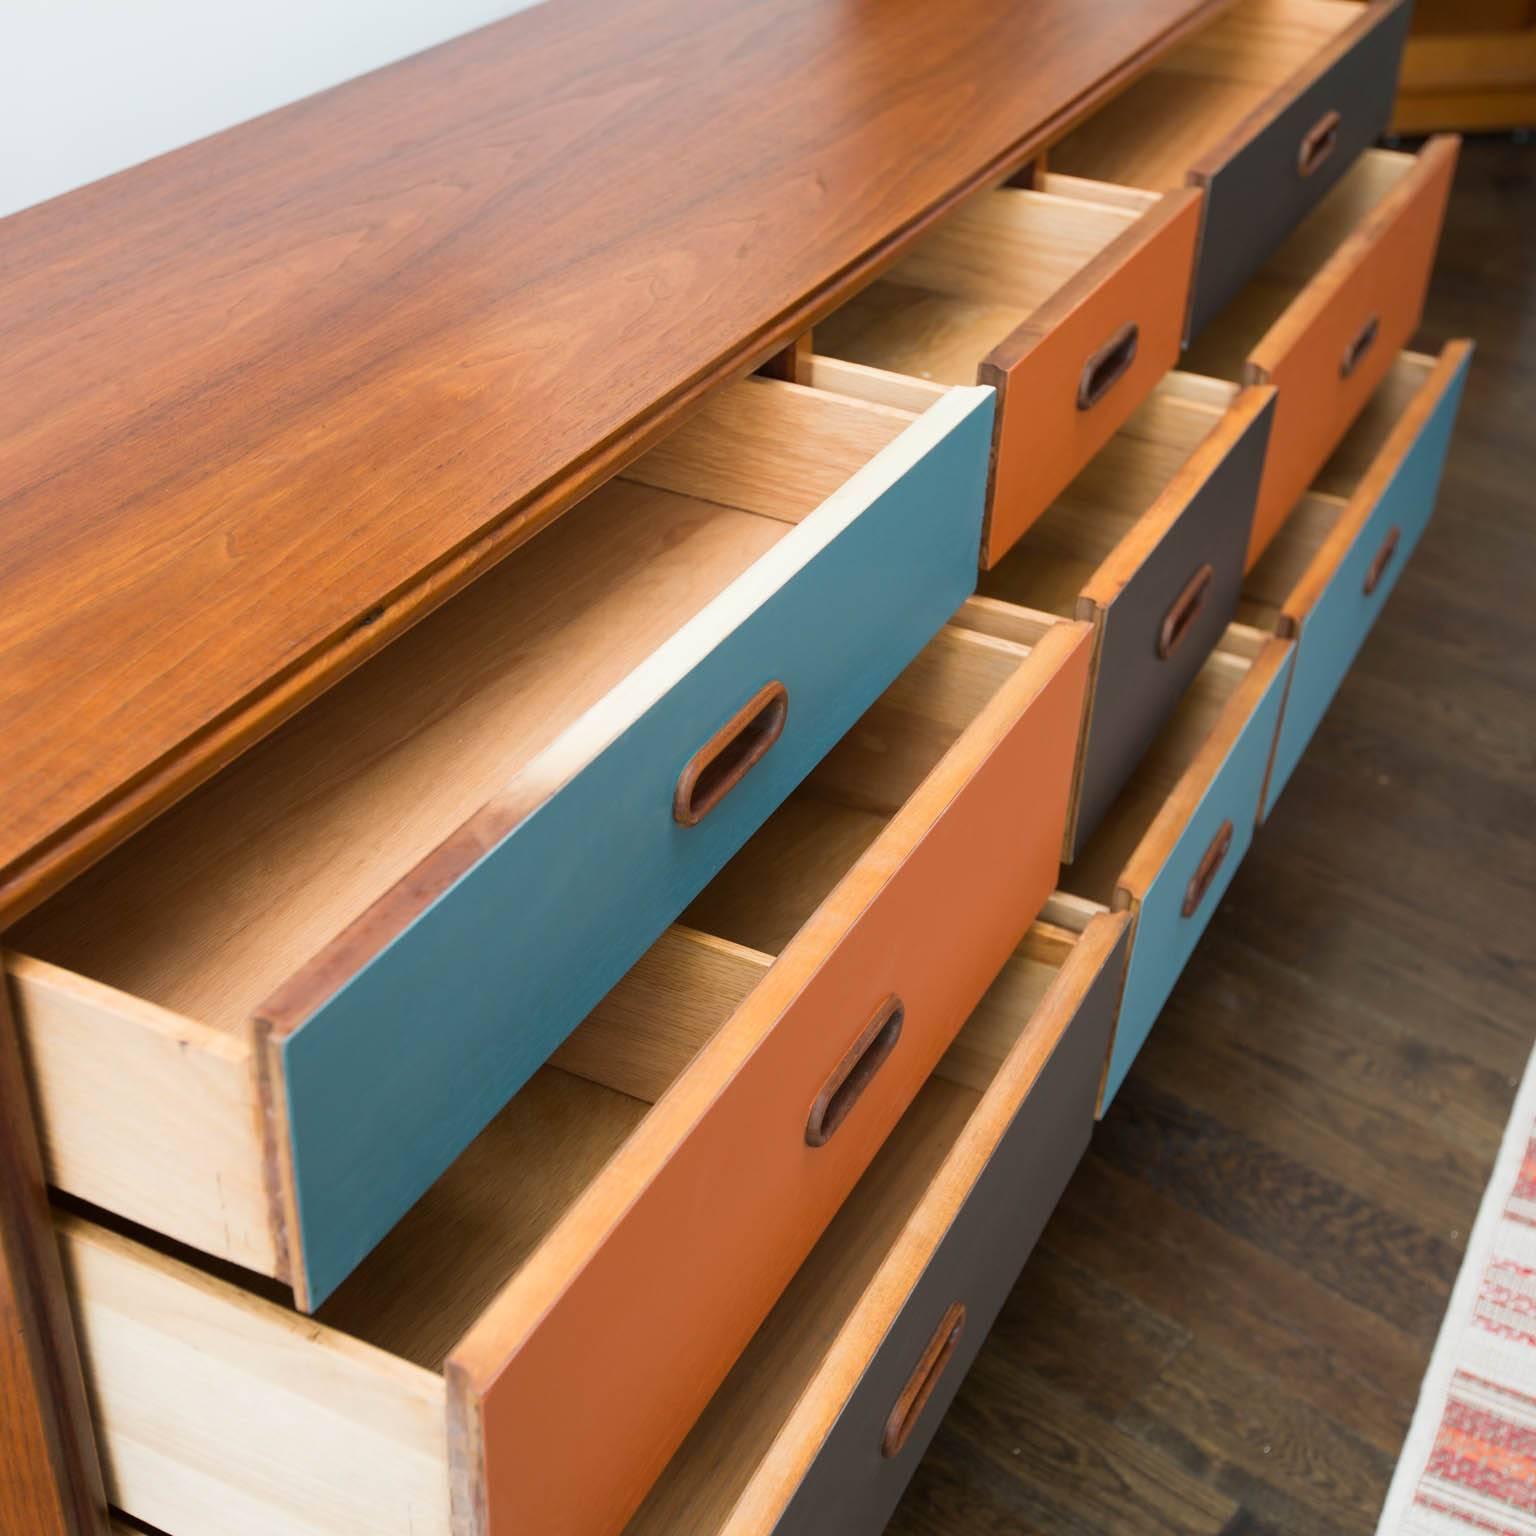 A nice tweaking of a vintage Danish modern Classic. Teak construction with lacquered drawer fronts.